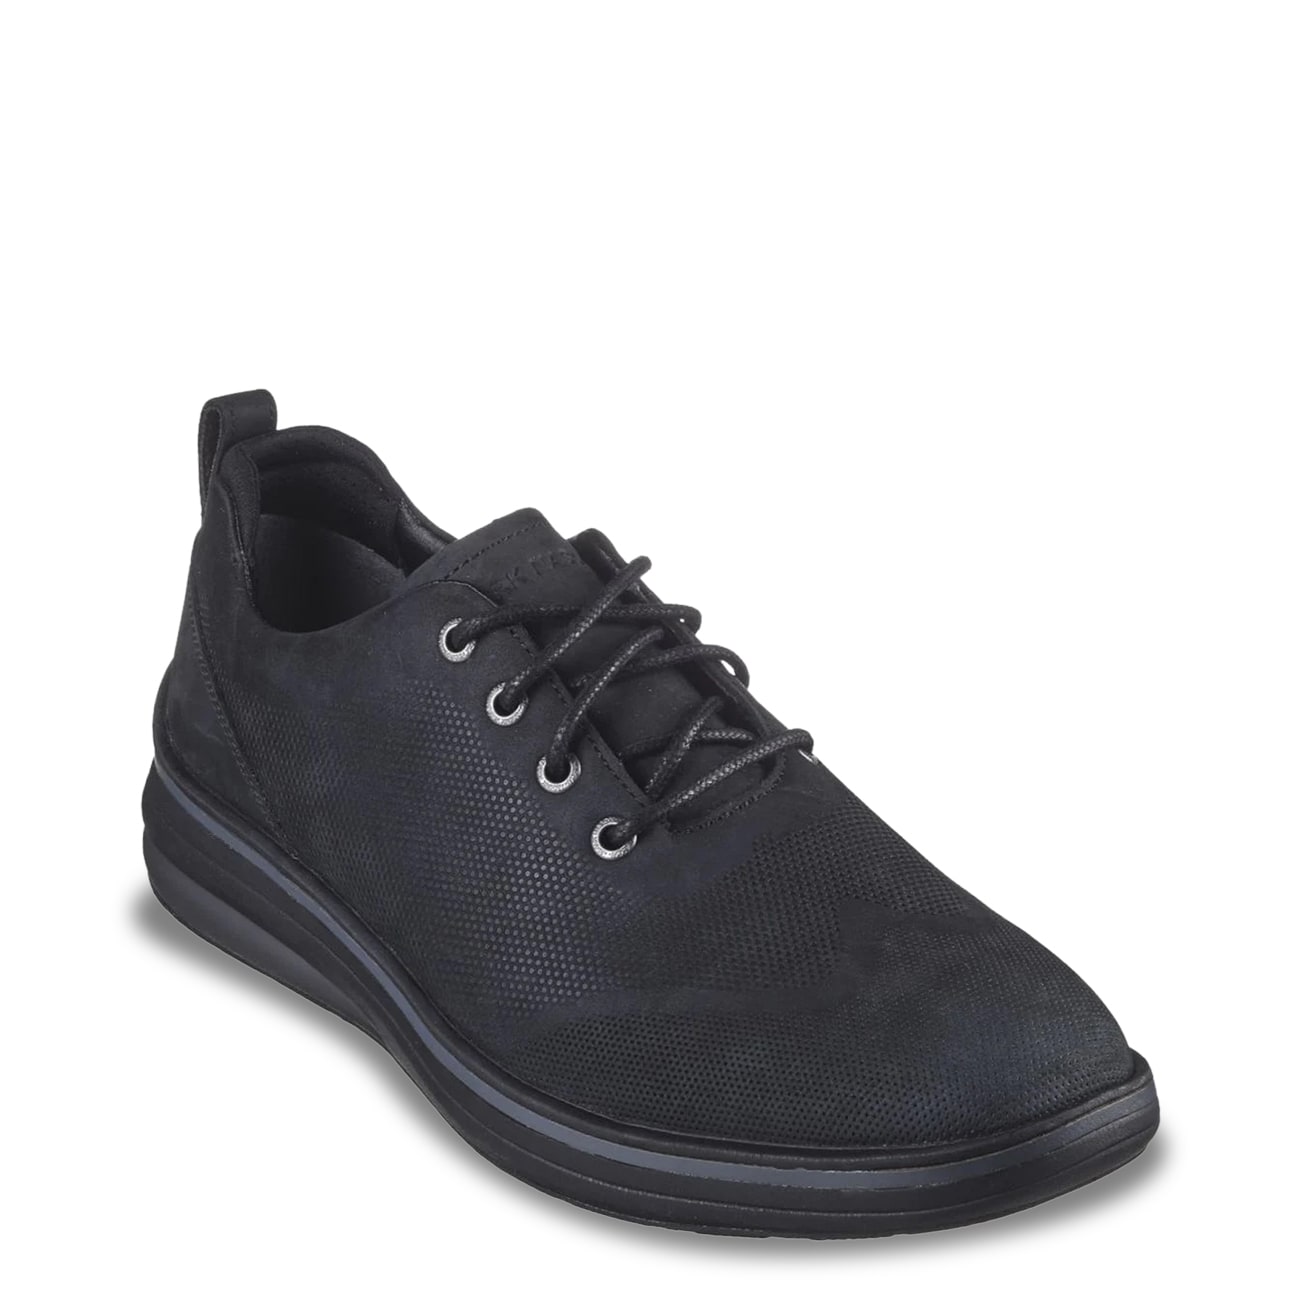 Men's Casual Cell Hollis by Skechers